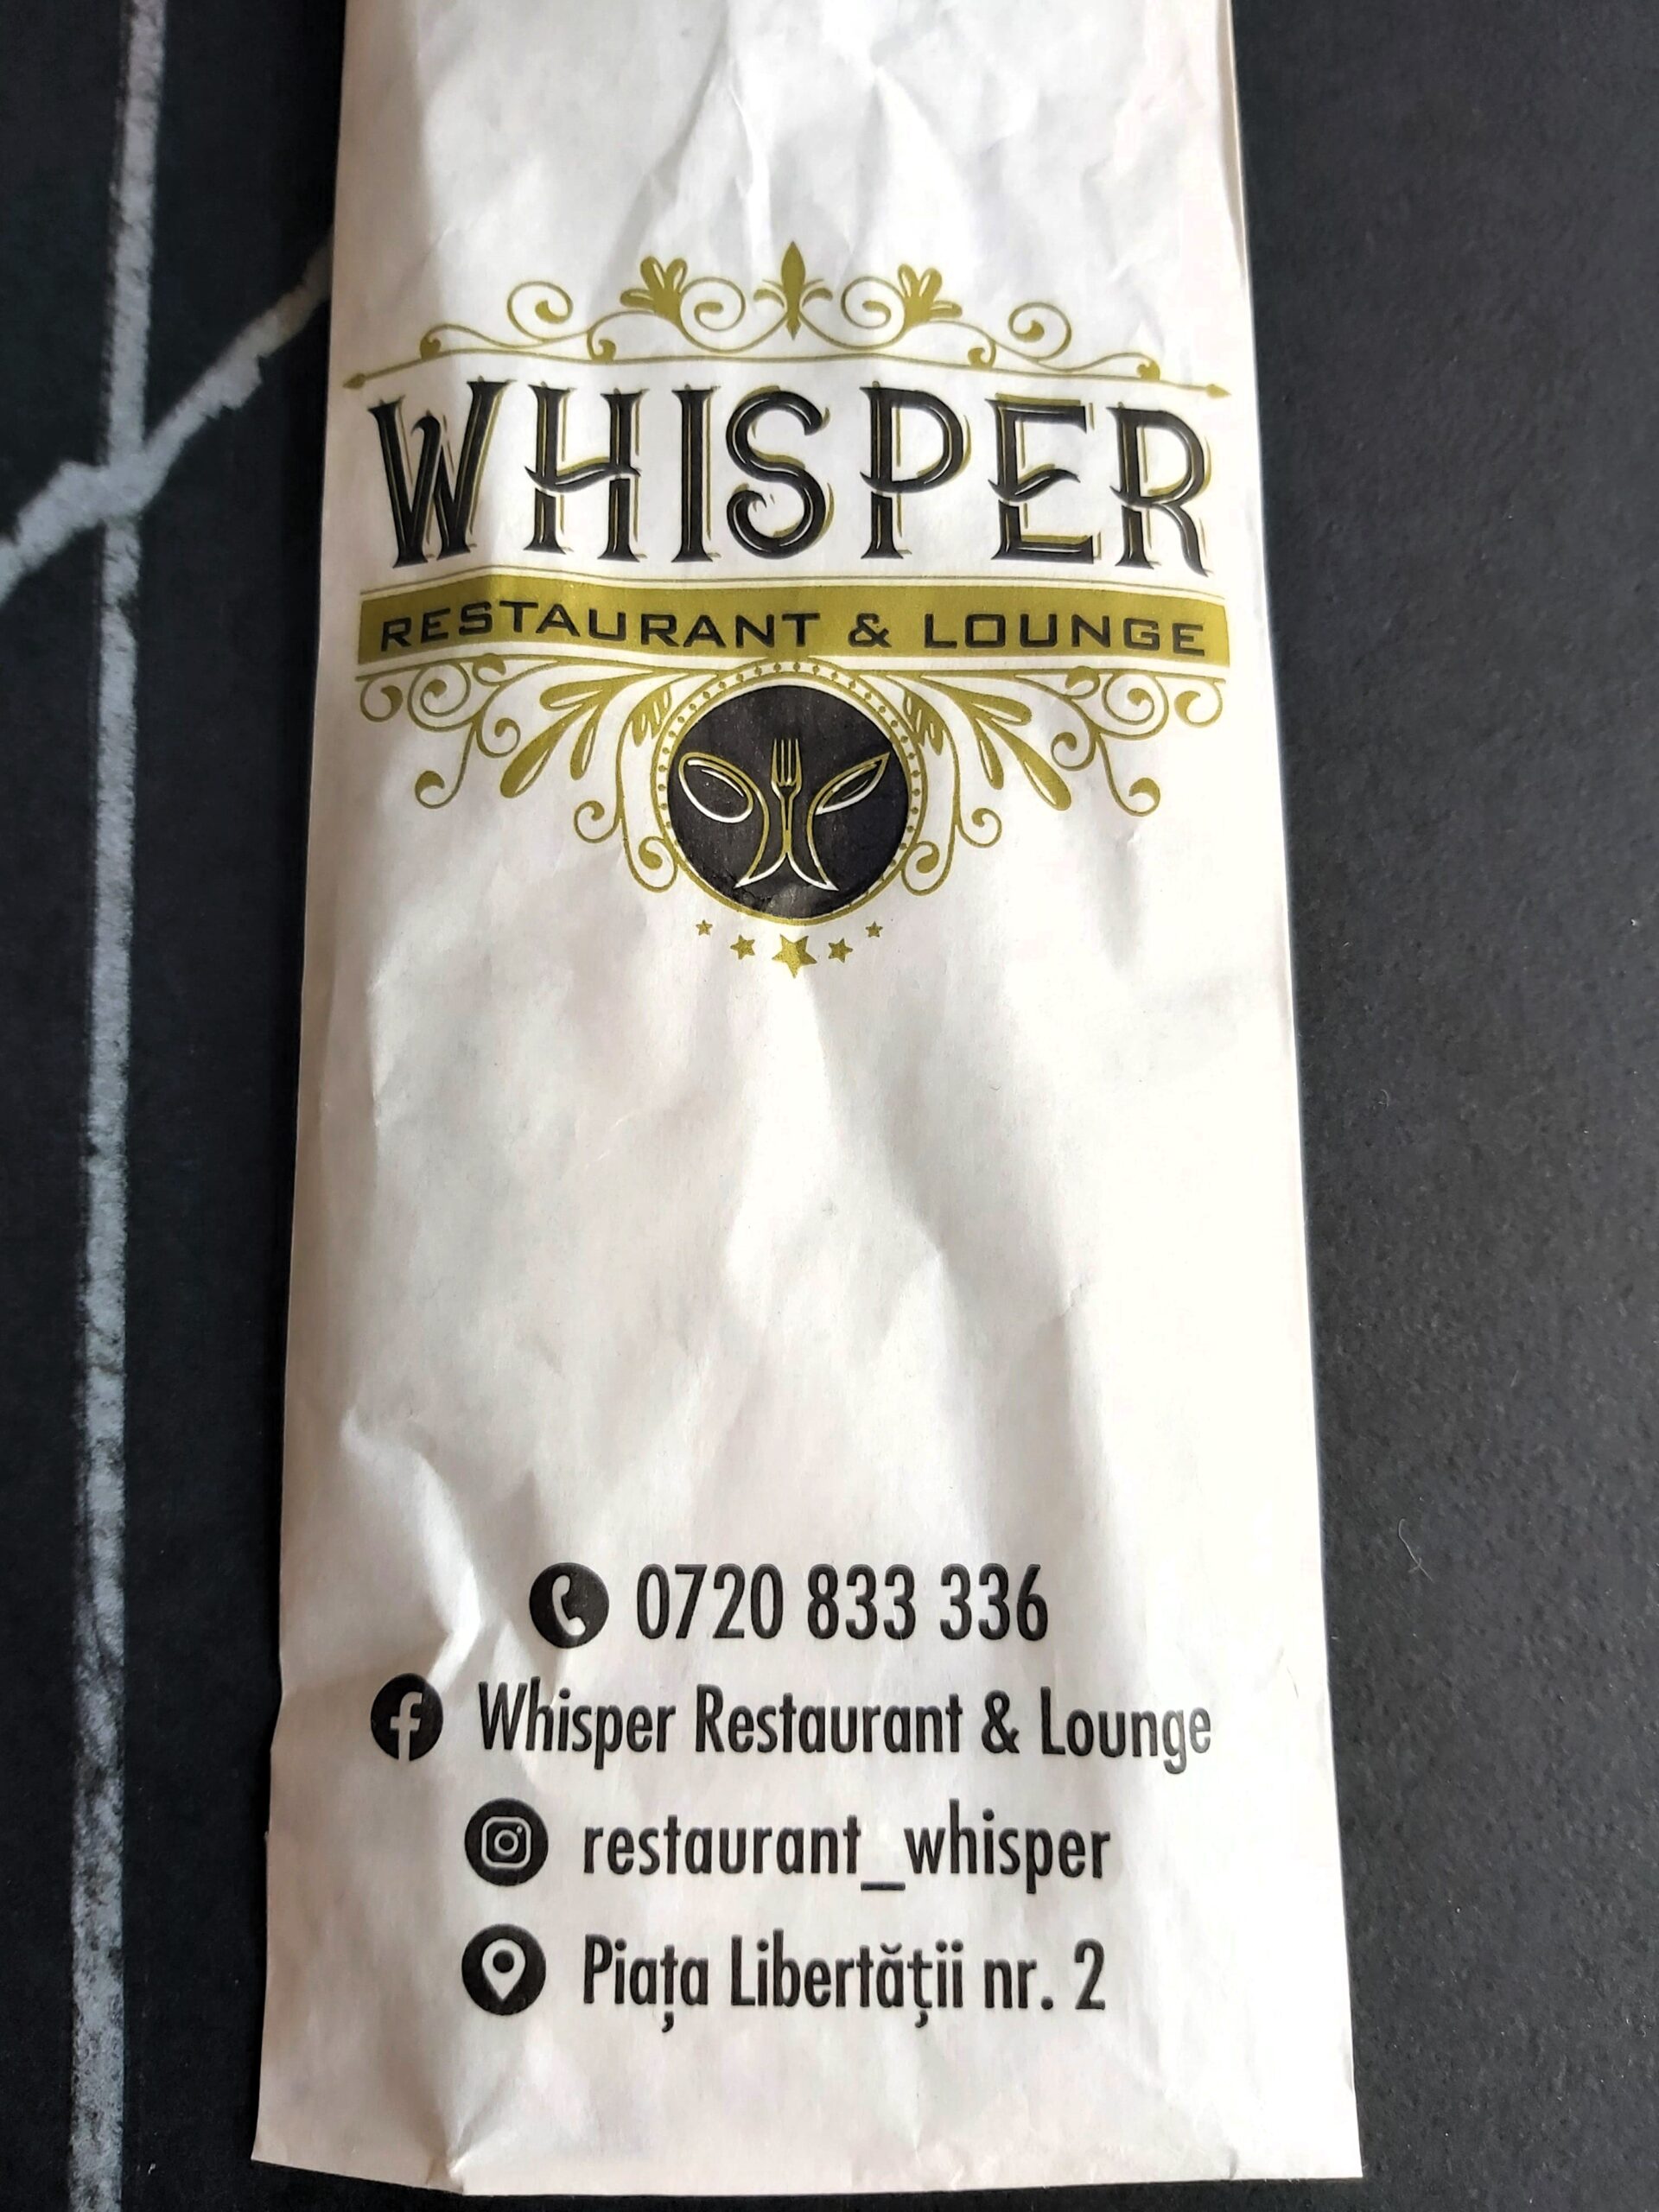 A set of cutlery sheathed with advertising for Whisper Restaurant and Lounge in Timisoara, Romania